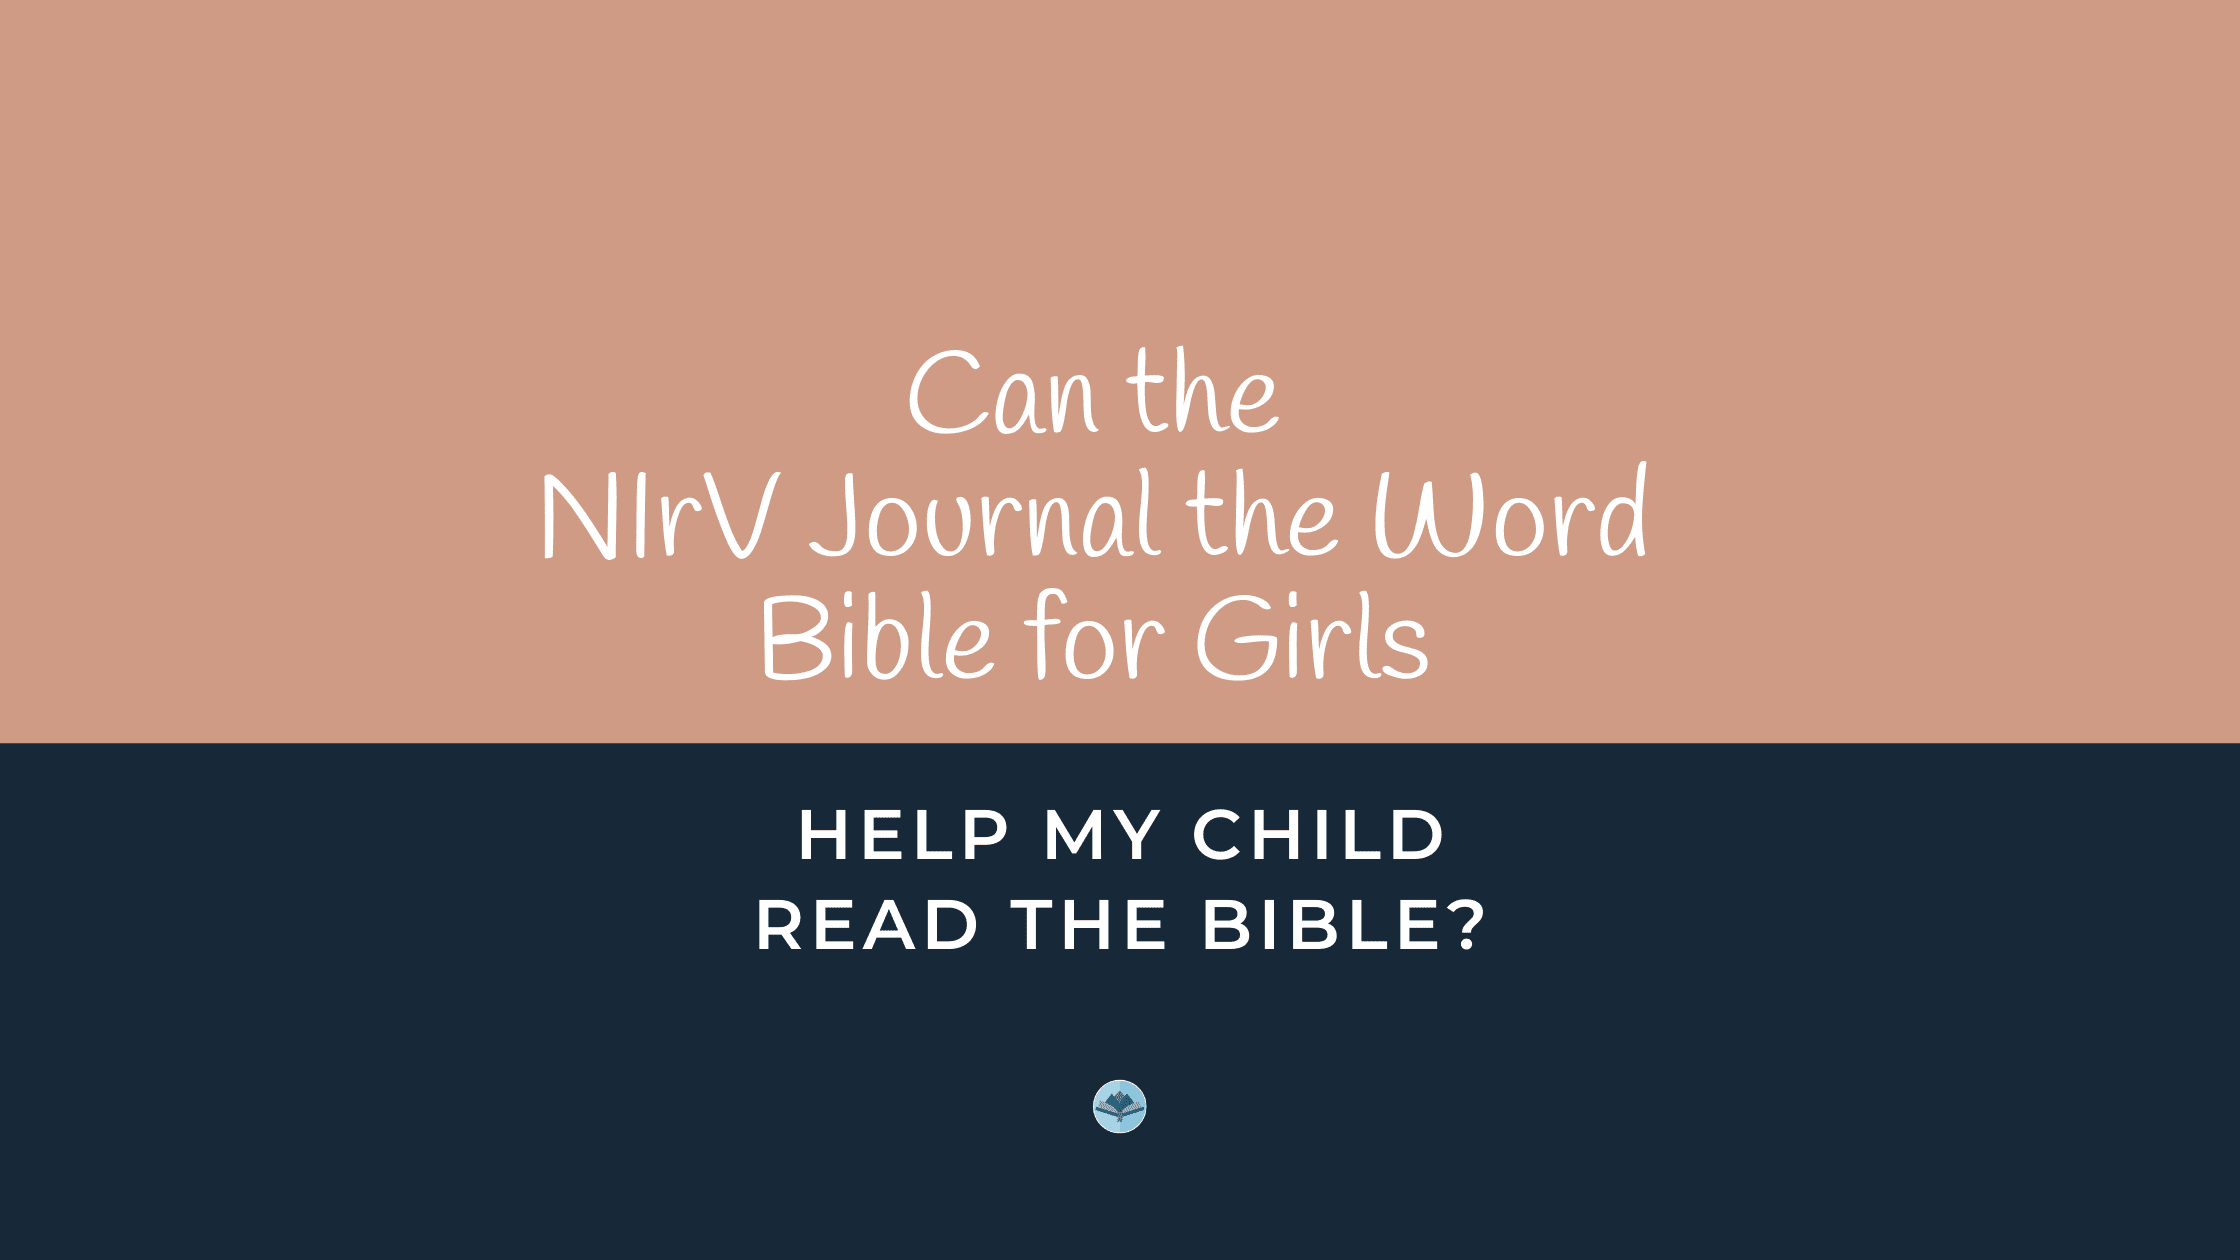 Can the NIrV Journal the Word Bible for Girls help my child read the Bible?